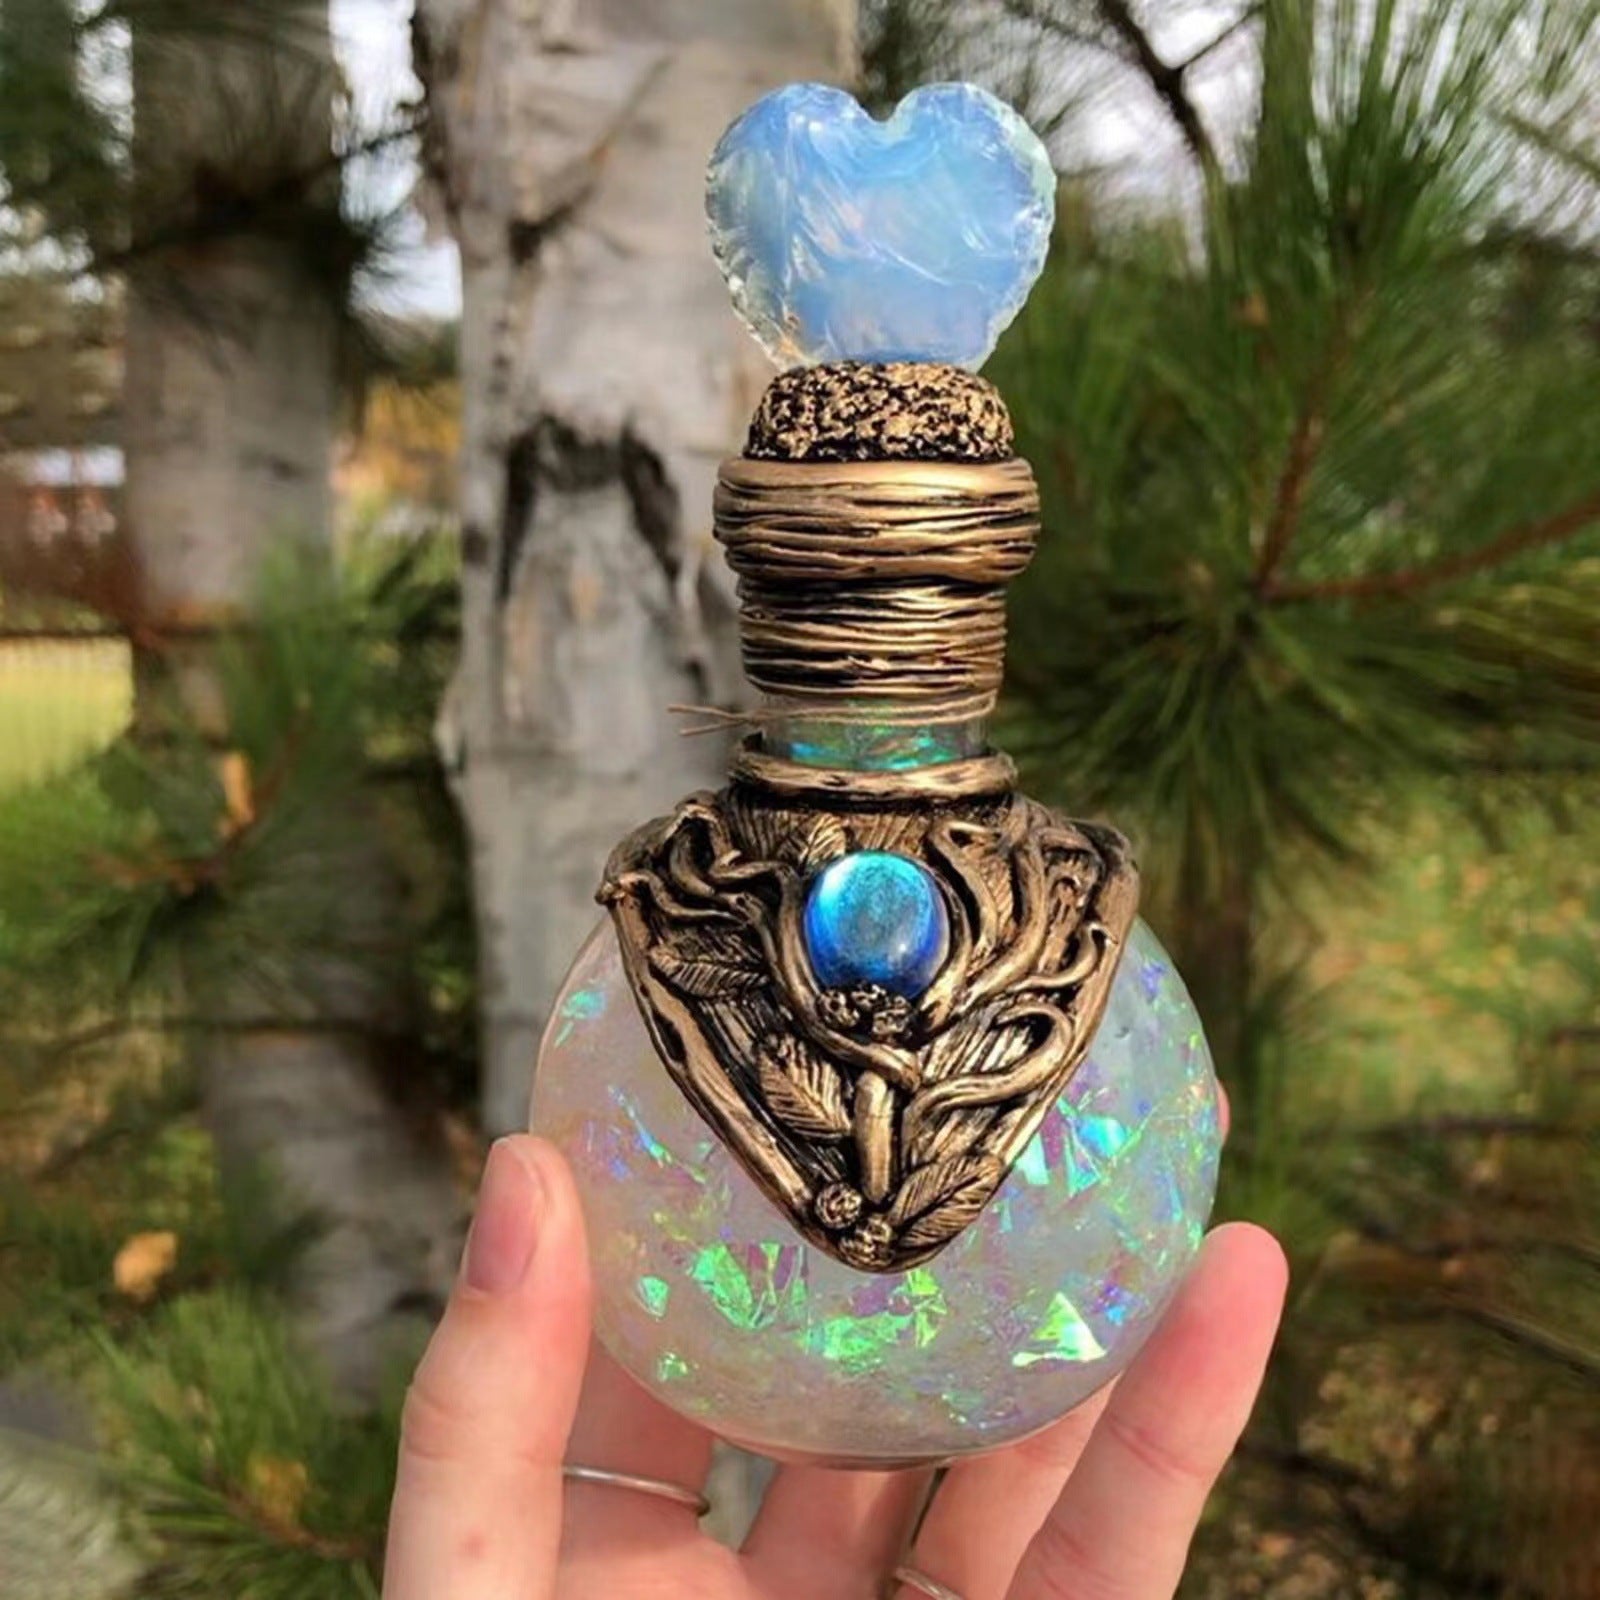 A person holding a Mermaid Moon Bottle perfume bottle by Maramalive™.